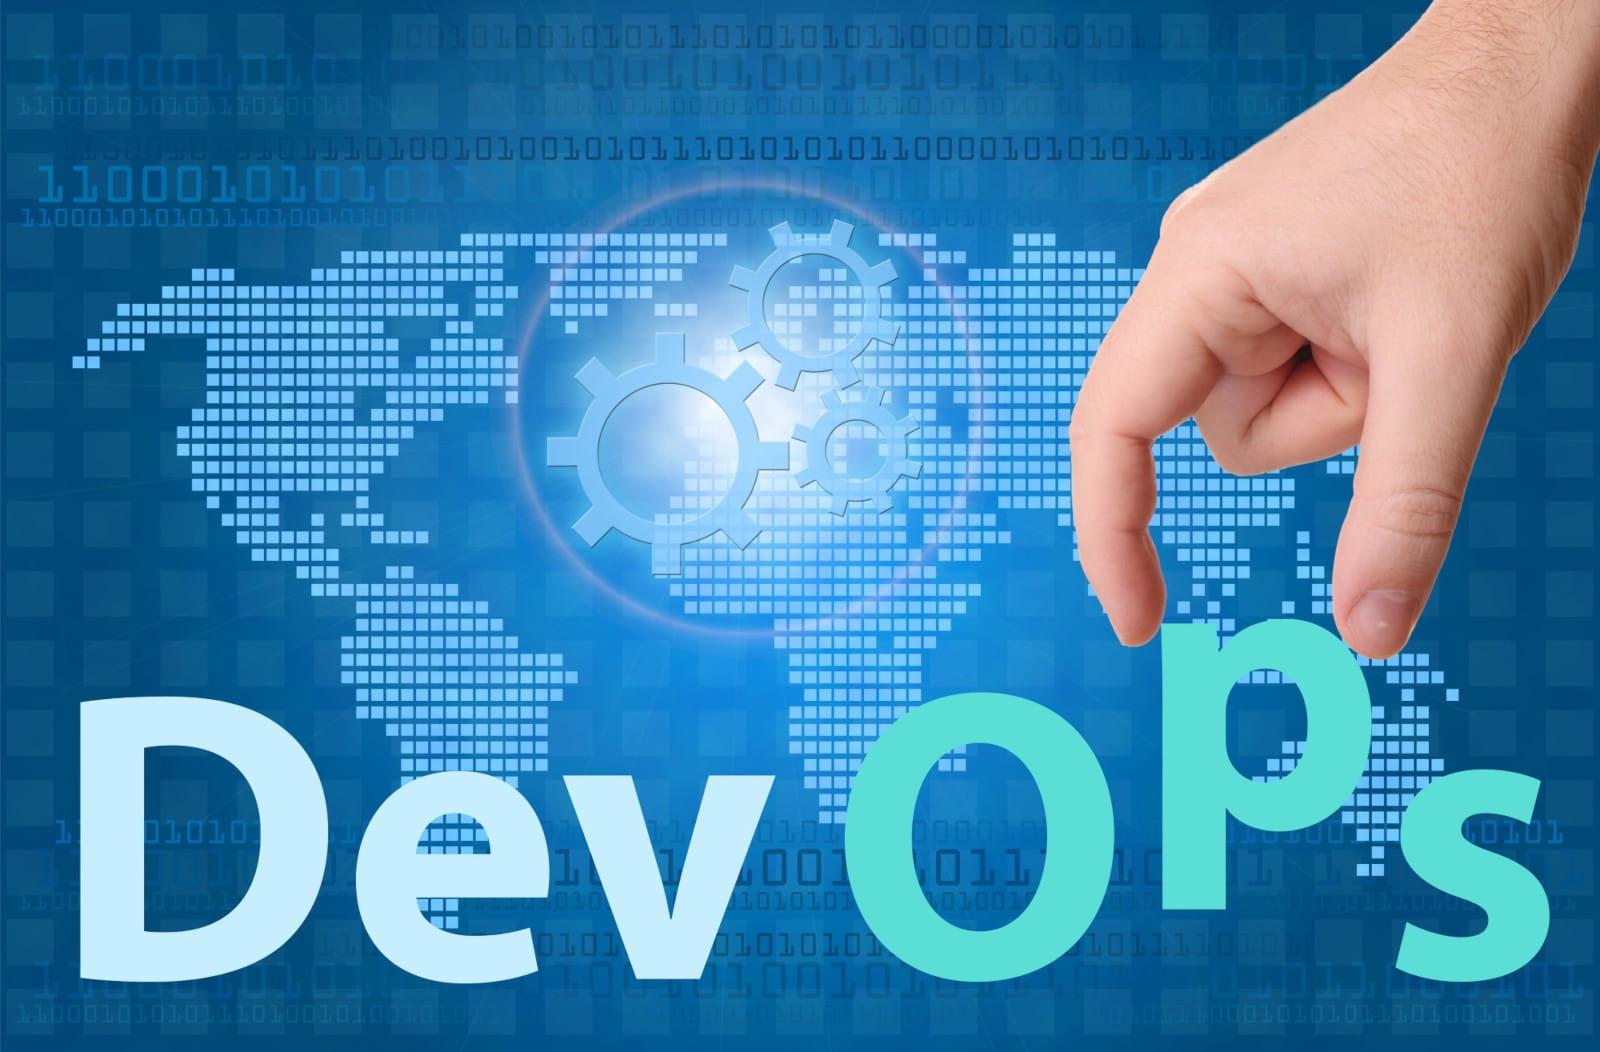 When looking for proper DevOps courses for your career, it's important you know what to look for and how to get certified. Learn here. - Advised Skills